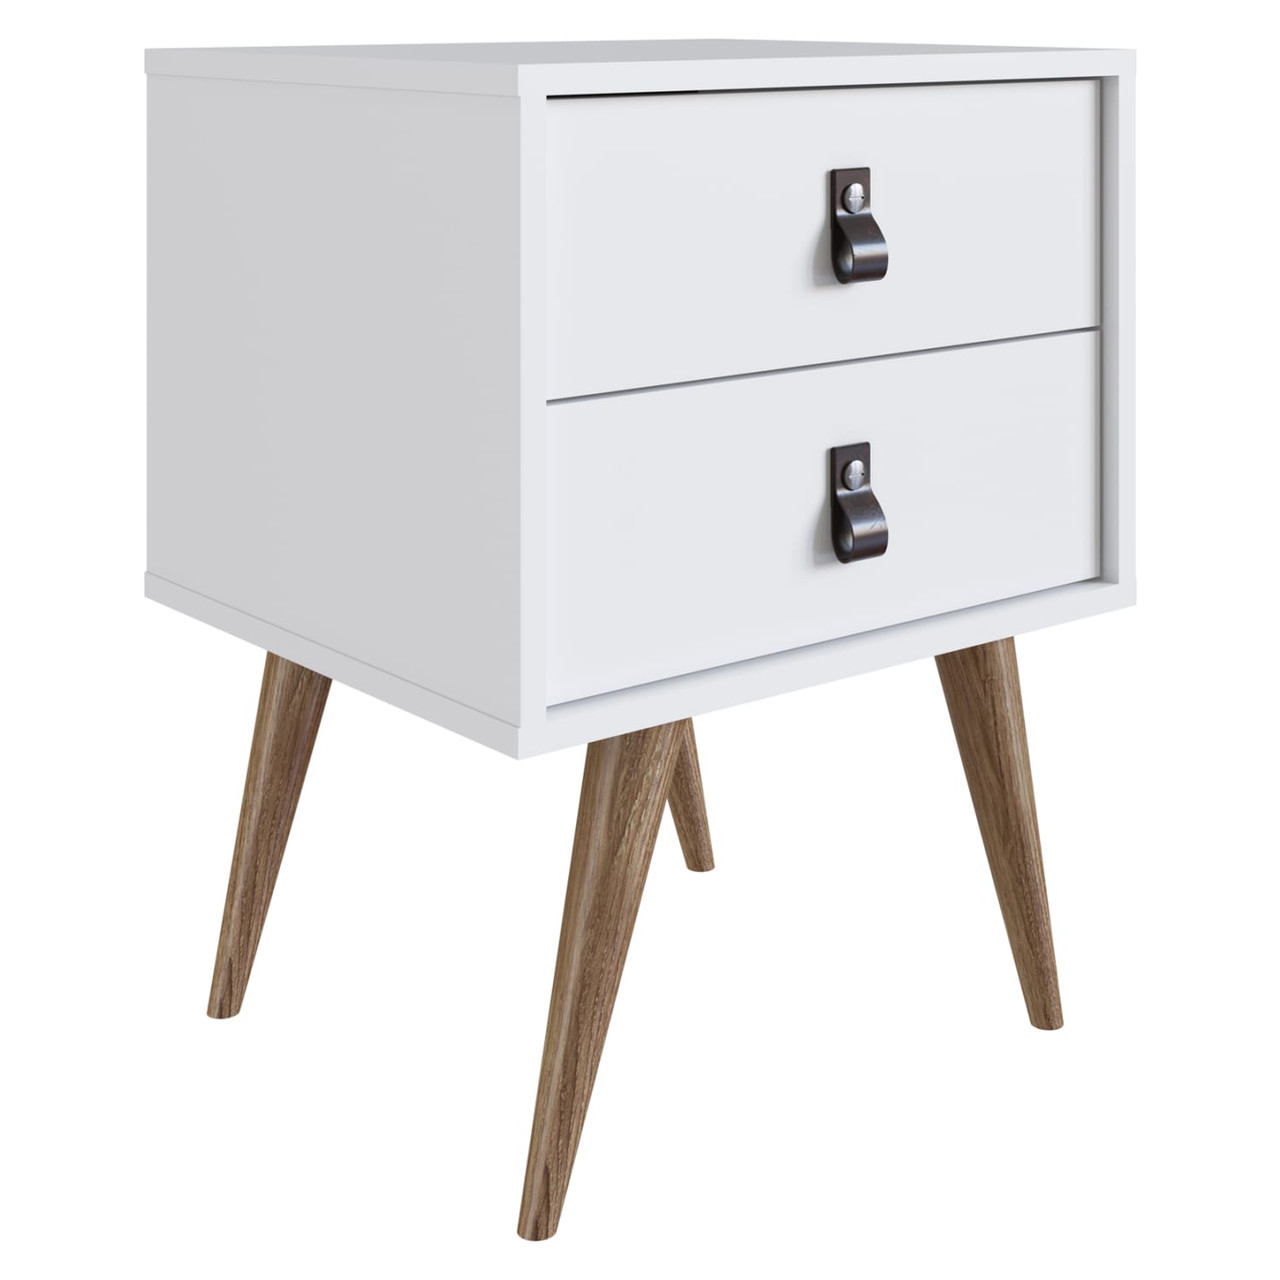 Amber Nightstand with Faux Leather Handles in White